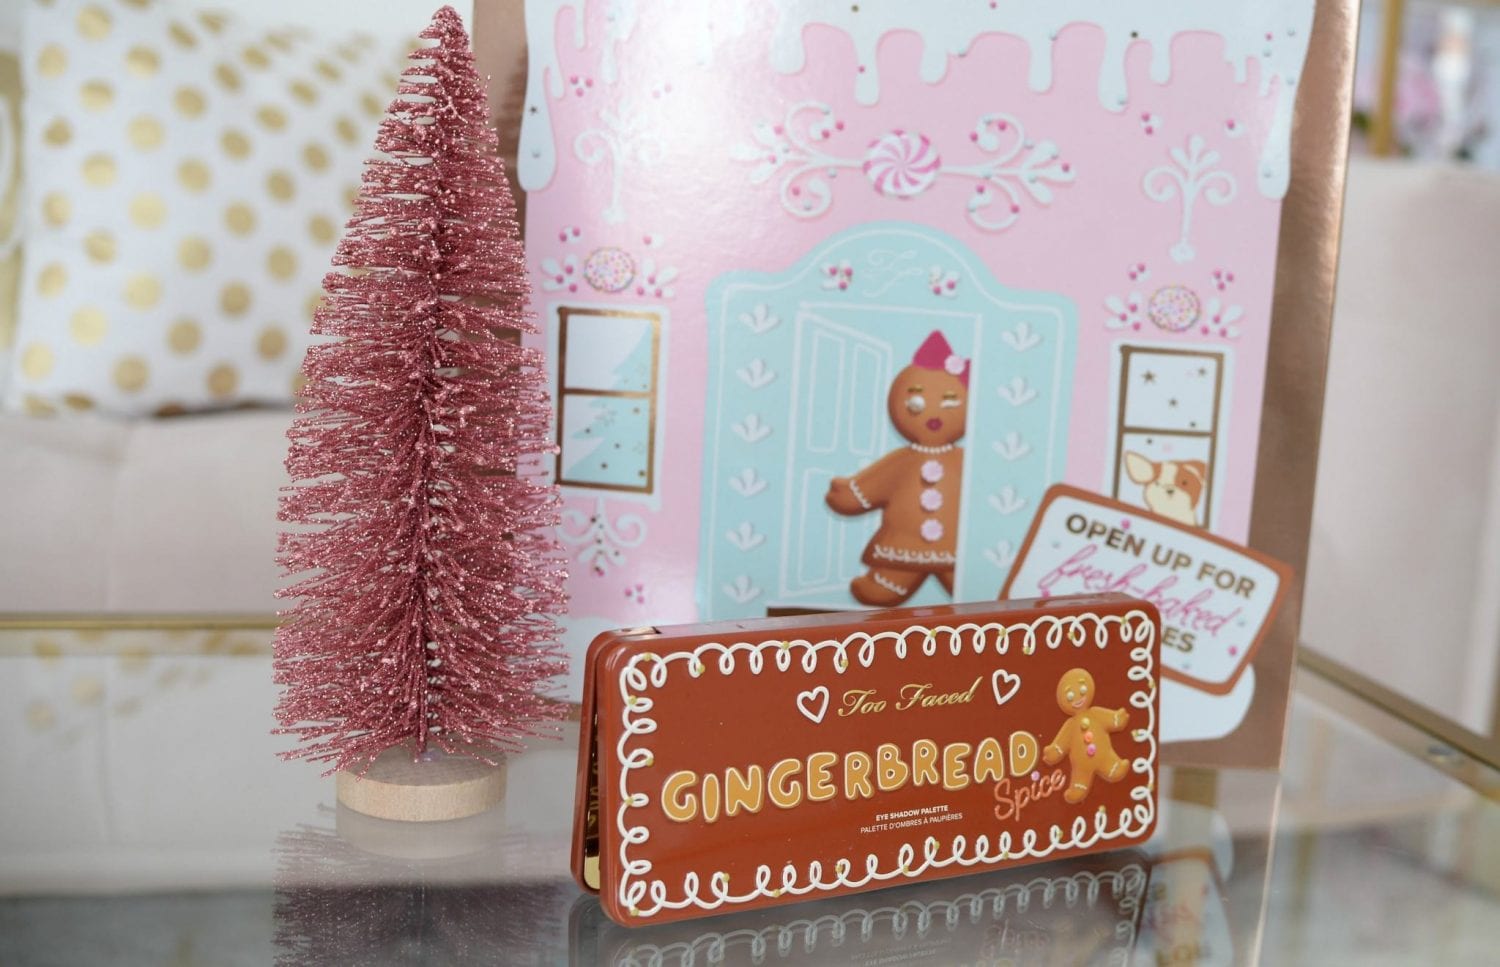 Too Faced Gingerbread Spiced Palette